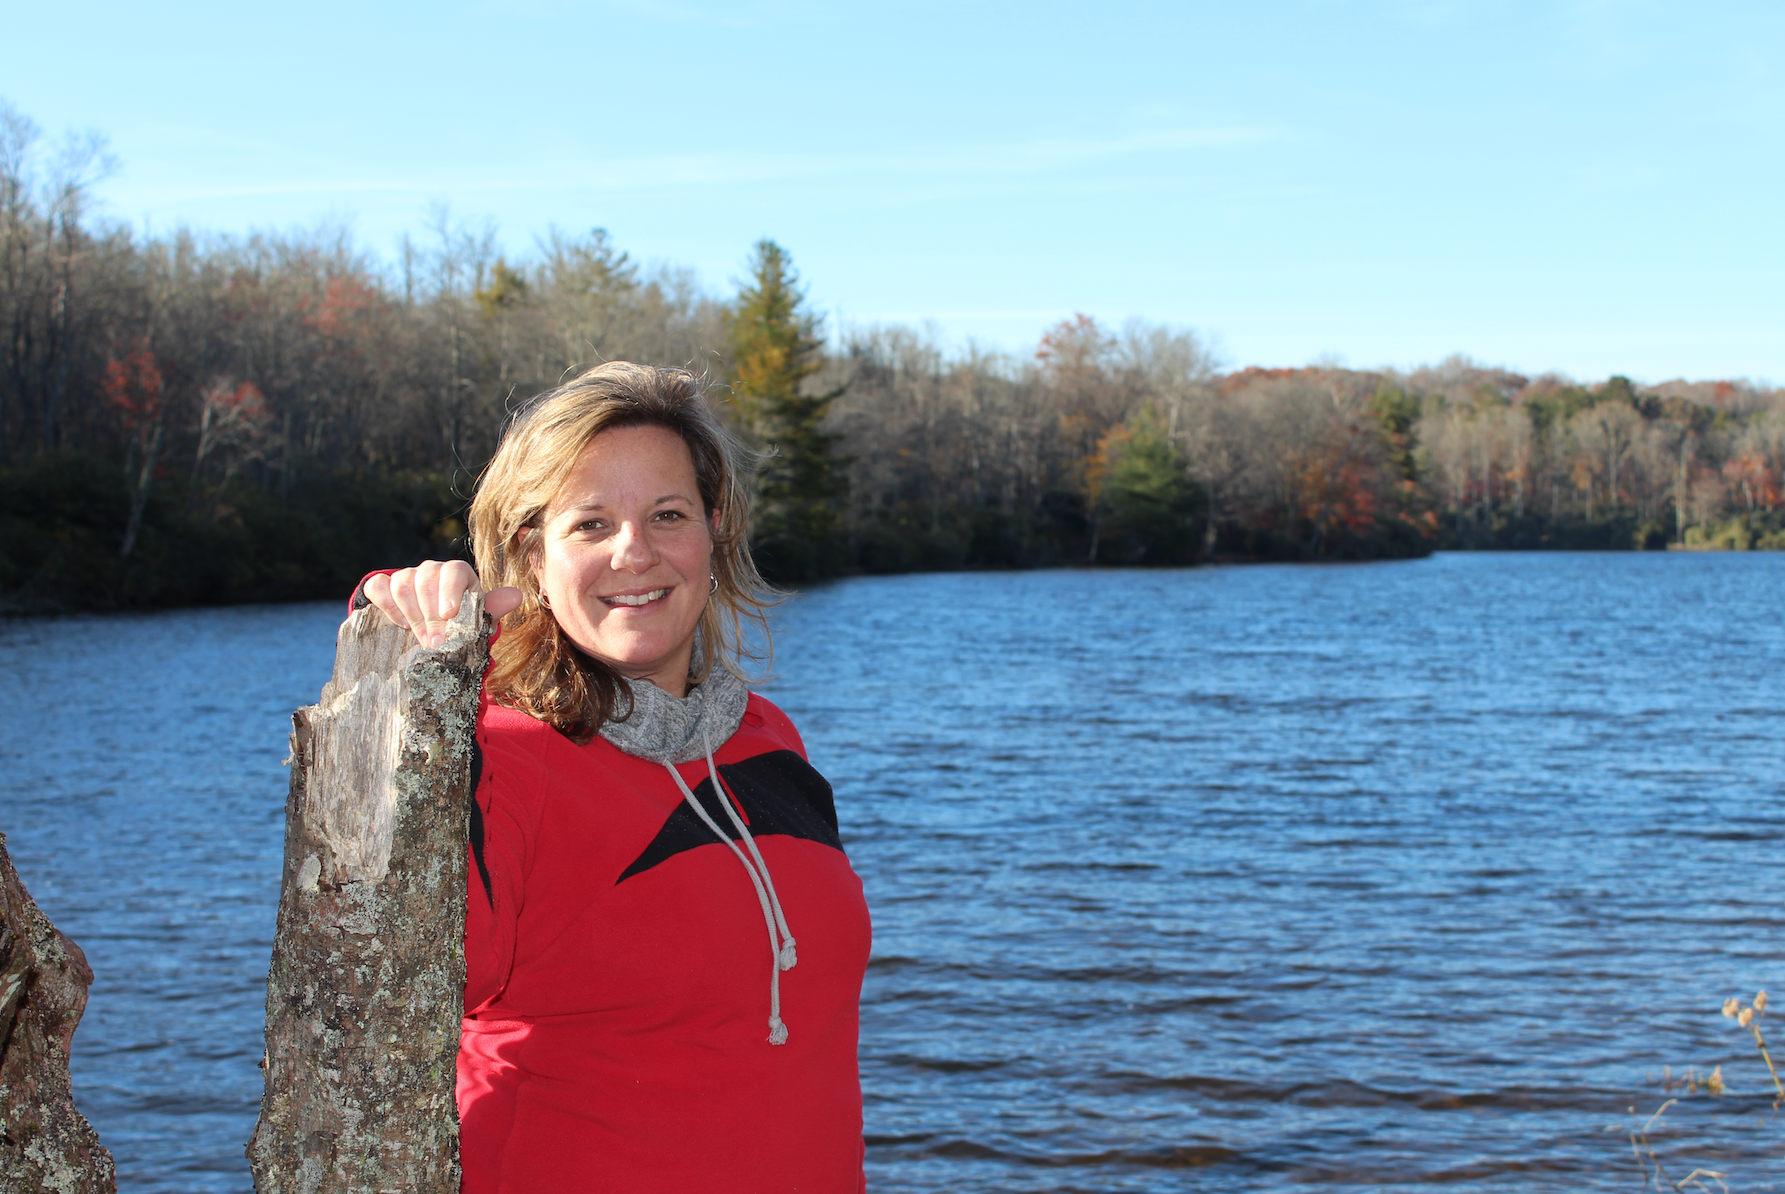 Woman smiling with lake behind her.